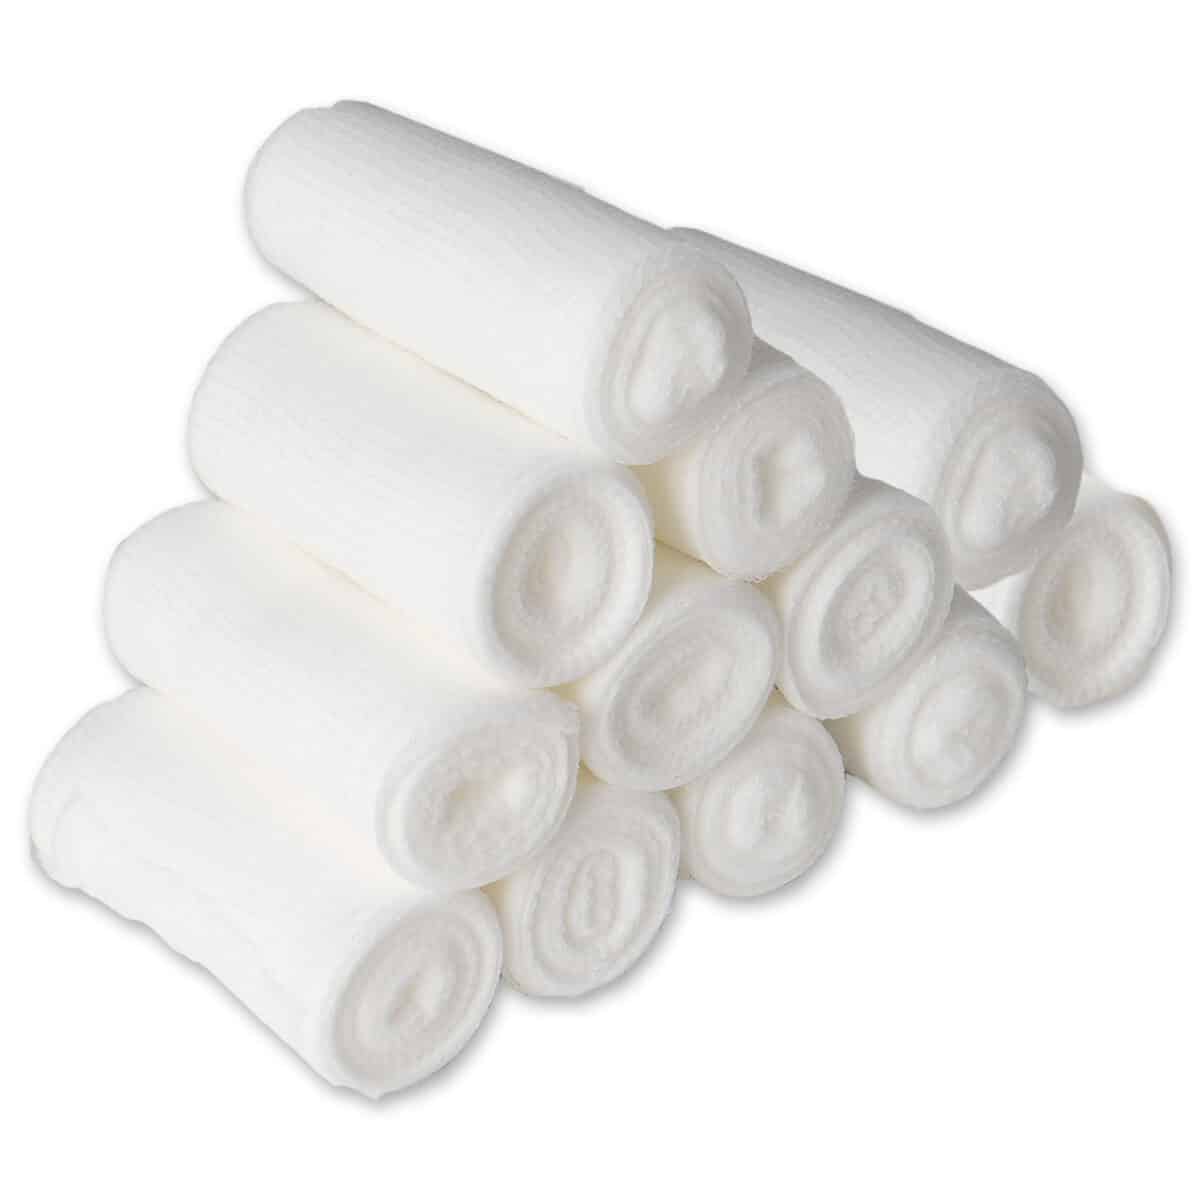 lightning x conforming stretch gauze roll rolled roller bandage 3" x 4.1yd individually wrapped pack of 12 rolls